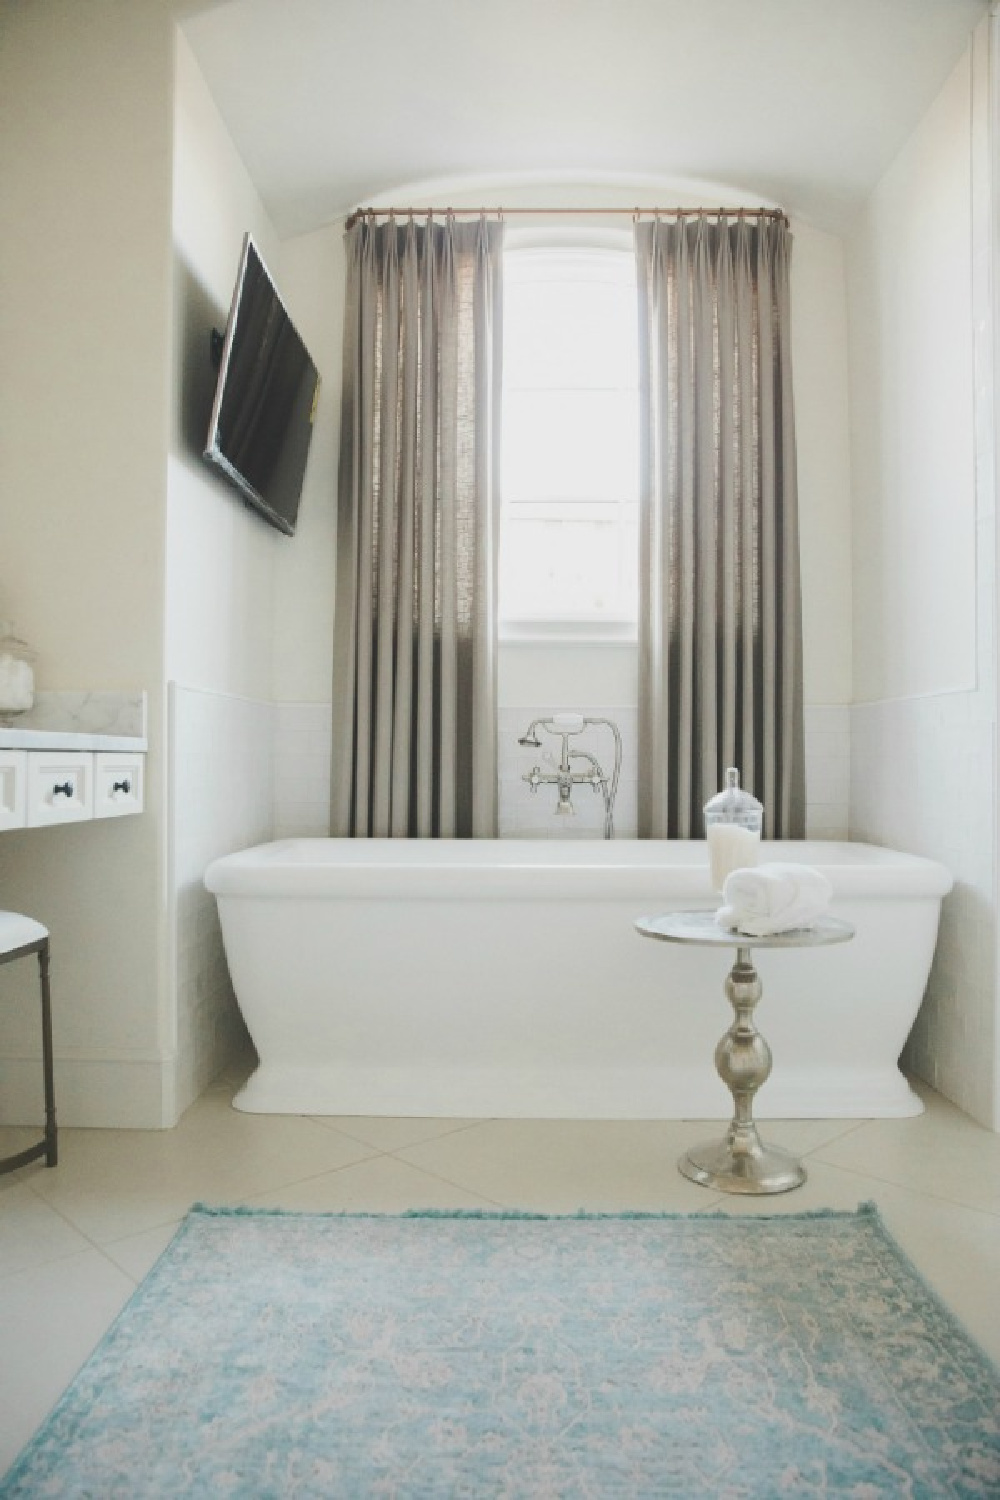 Serwin Williams Alabaster paint on walls. Elegant French country white bathroom with freestanding tub and drapes at window. Brit Jones Design.